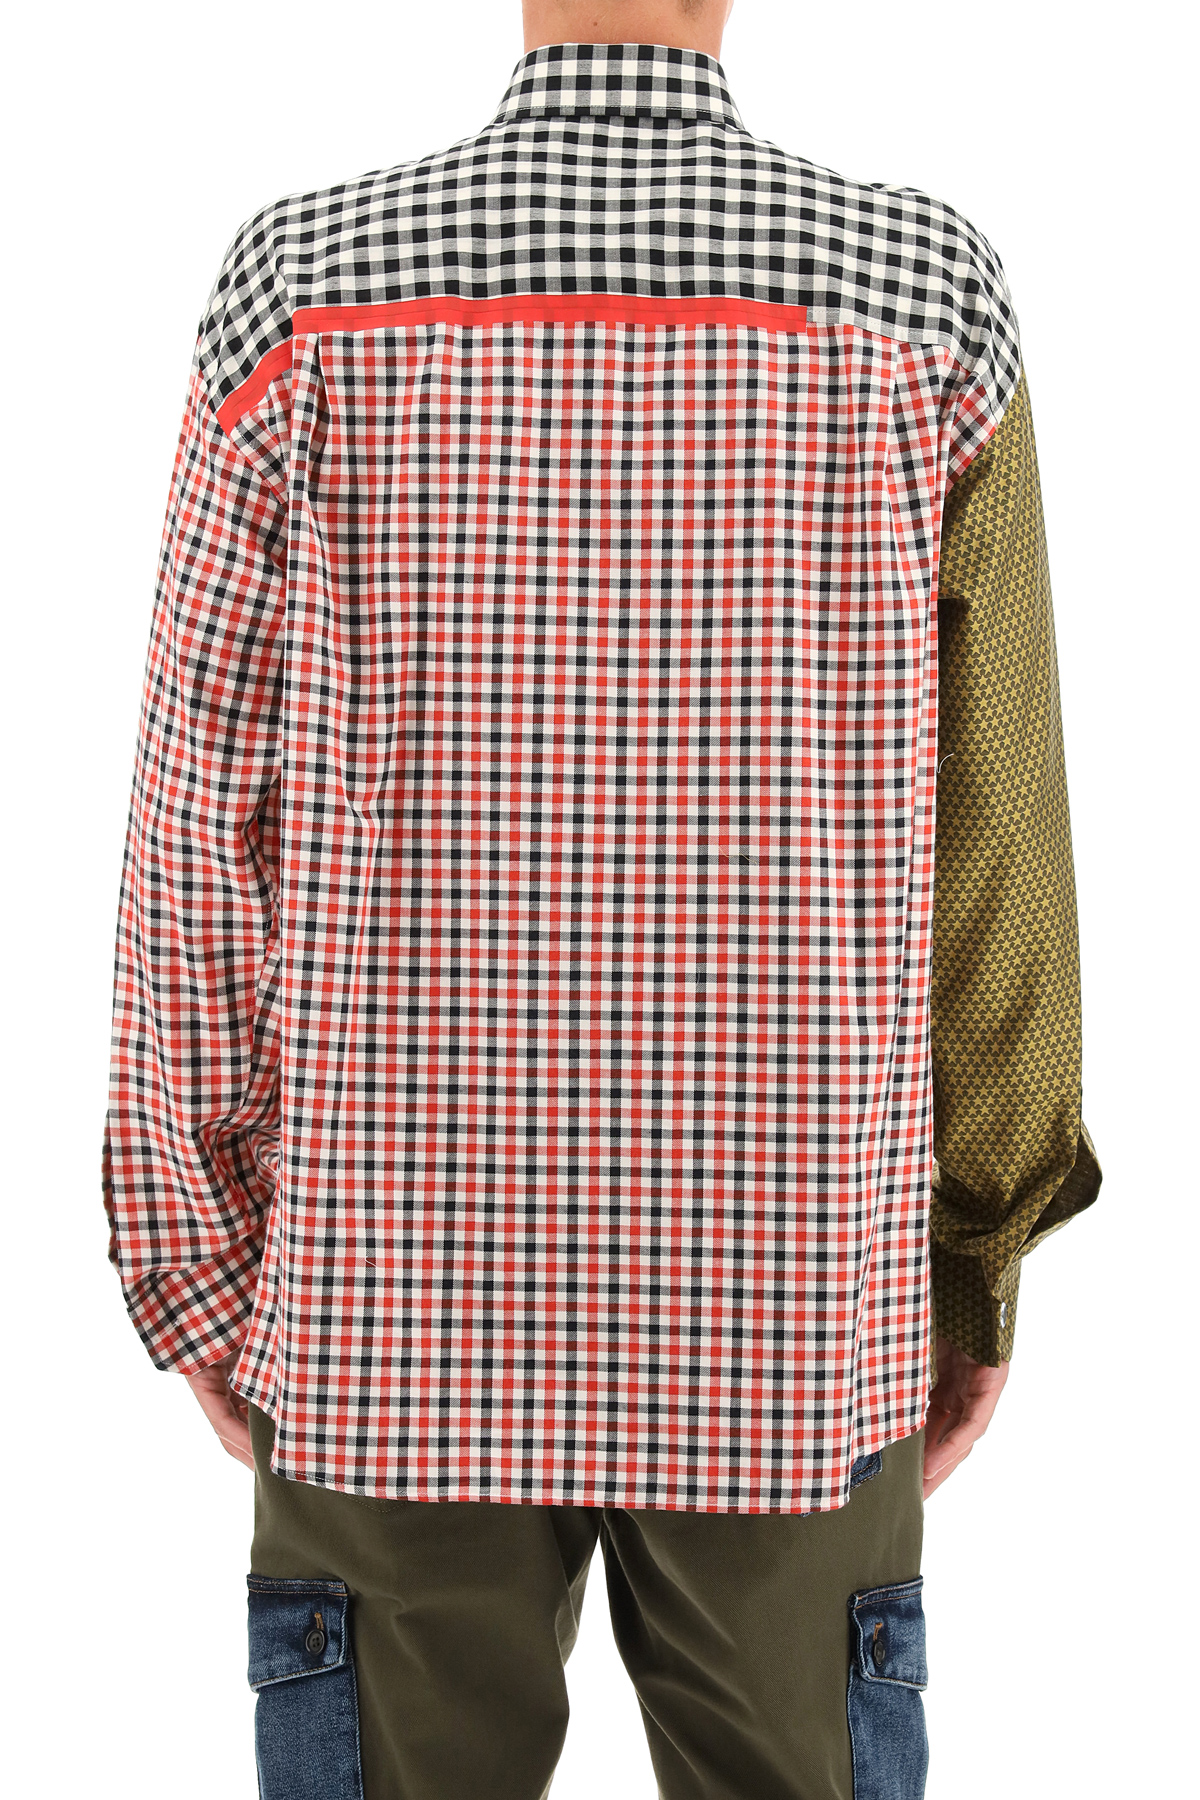 Dolce & Gabbana Oversized Gingham Patchwork Shirt   Red